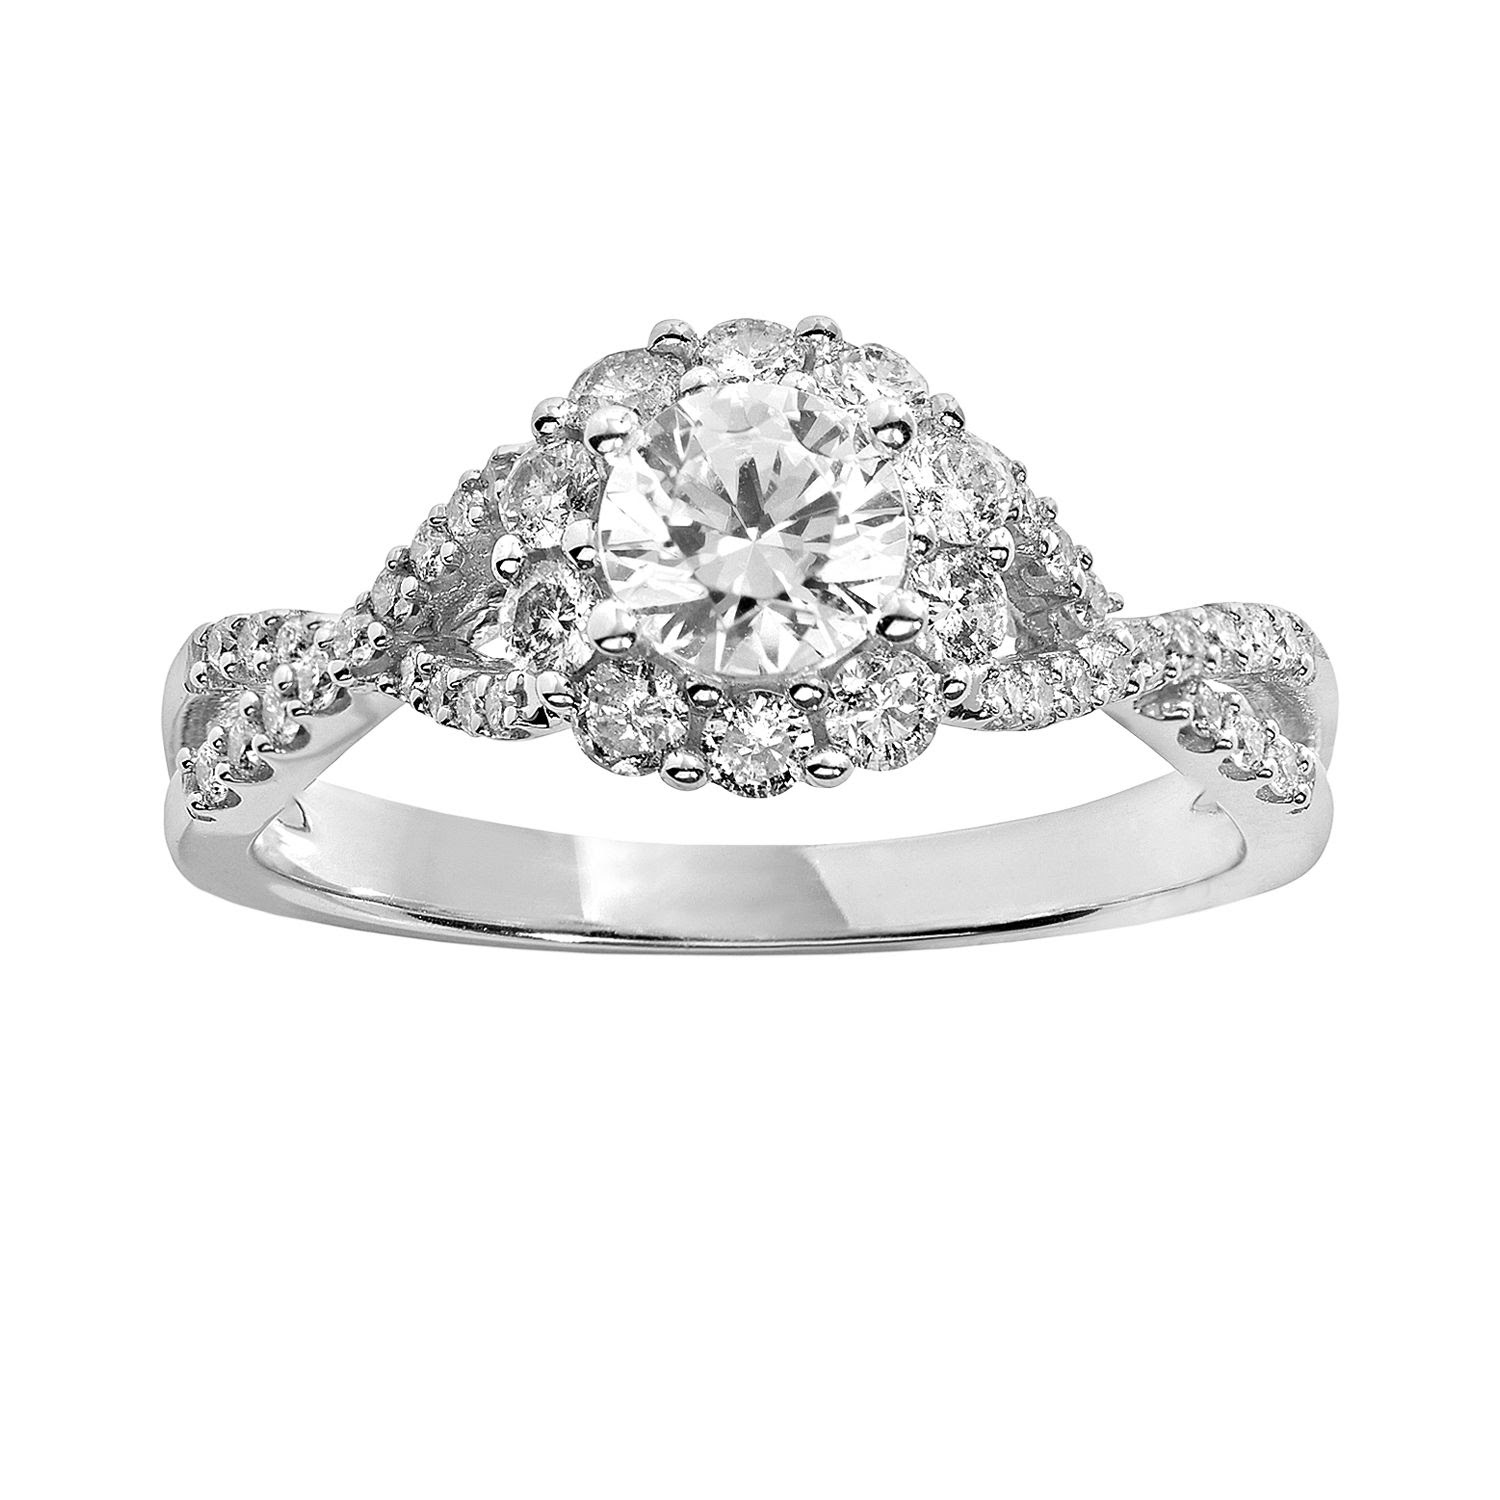 Cheap engagement ring for young Yellow gold engagement rings kohl's